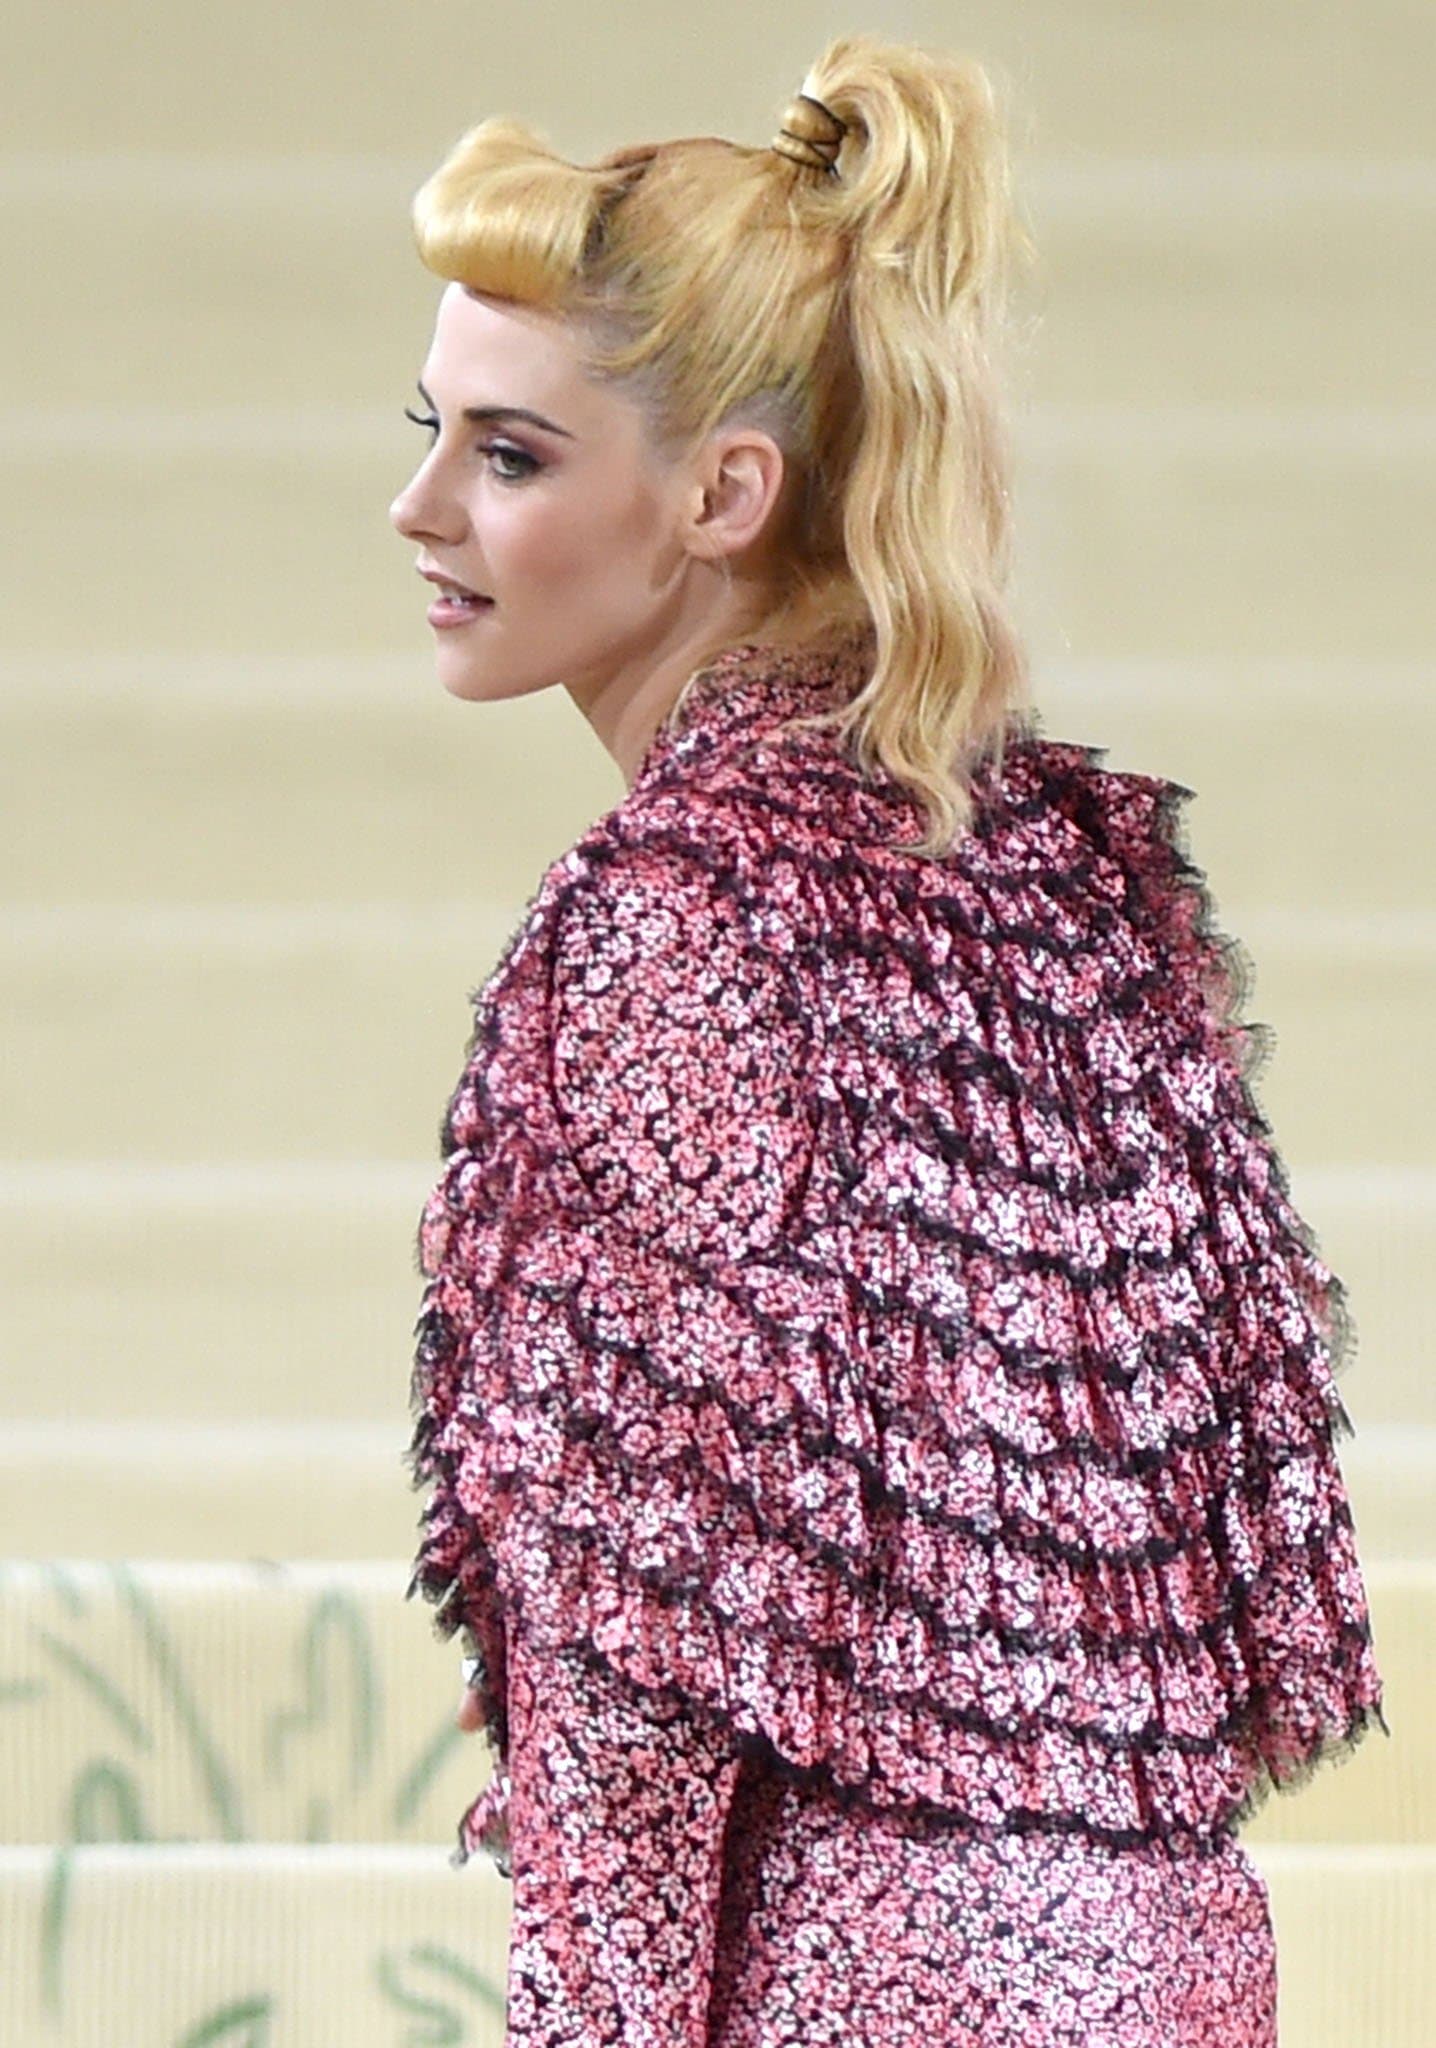 Kristen Stewart wears barbie pink smokey eye-makeup and styles her hair in a high ponytail with faux-fringe